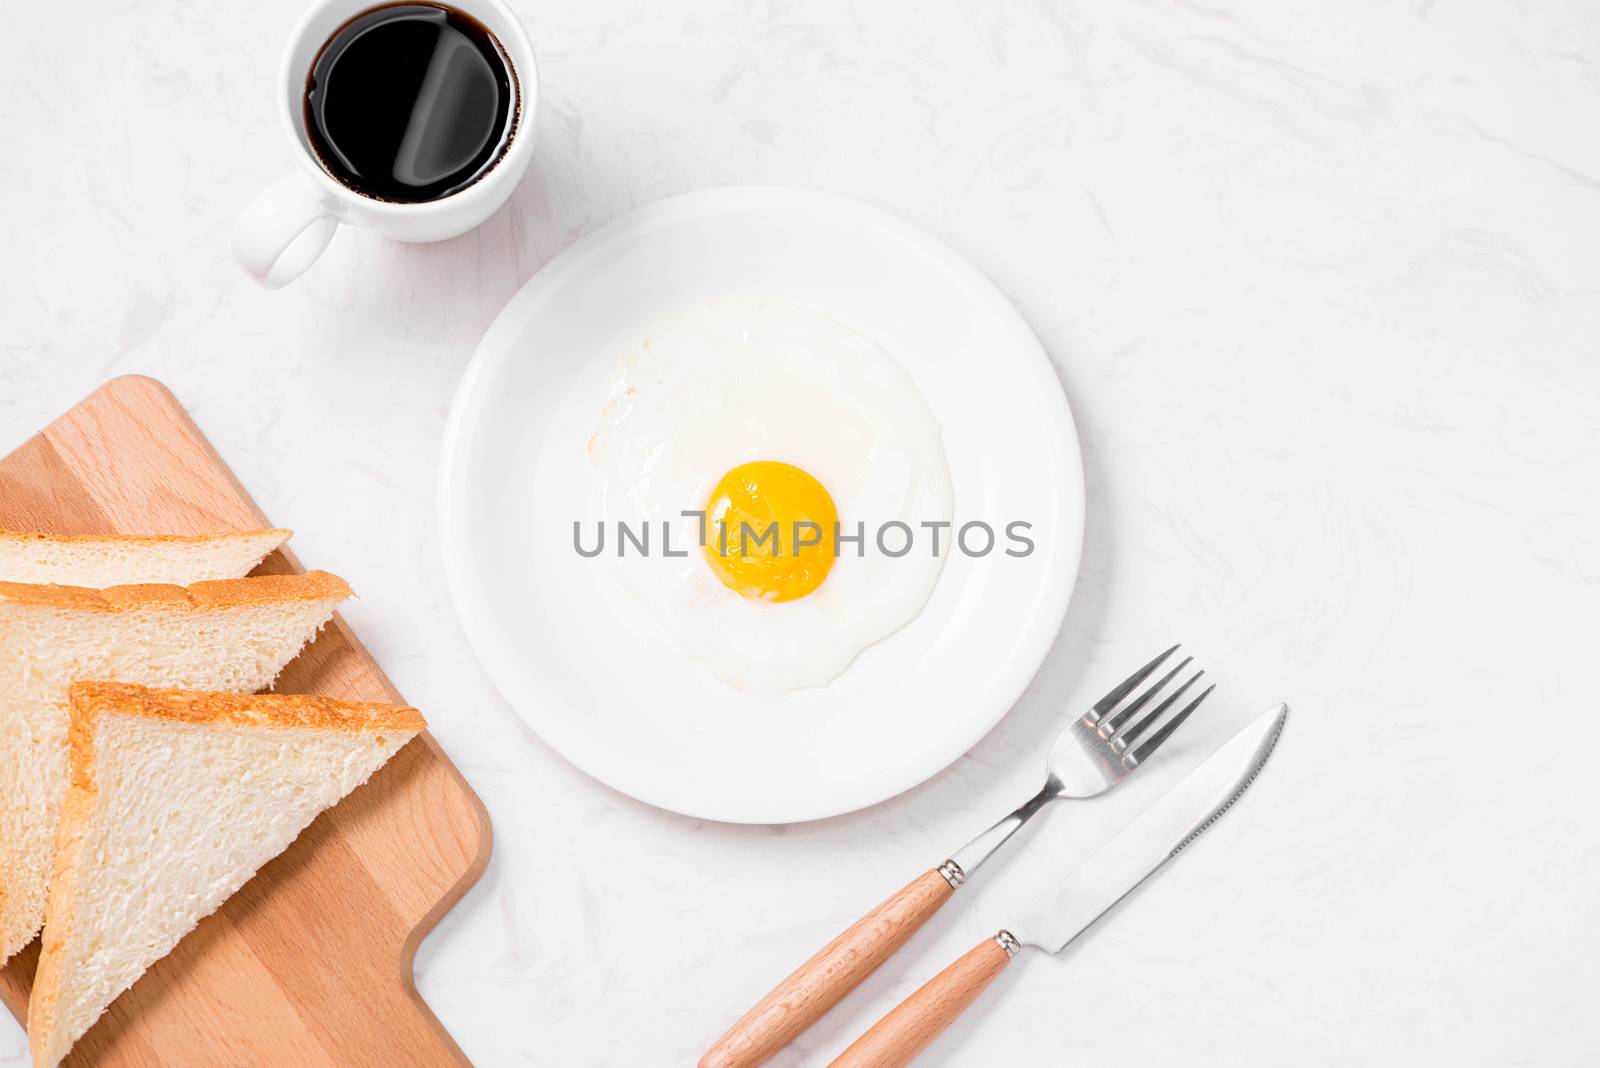 Traditional breakfast with fried eggs on a plate